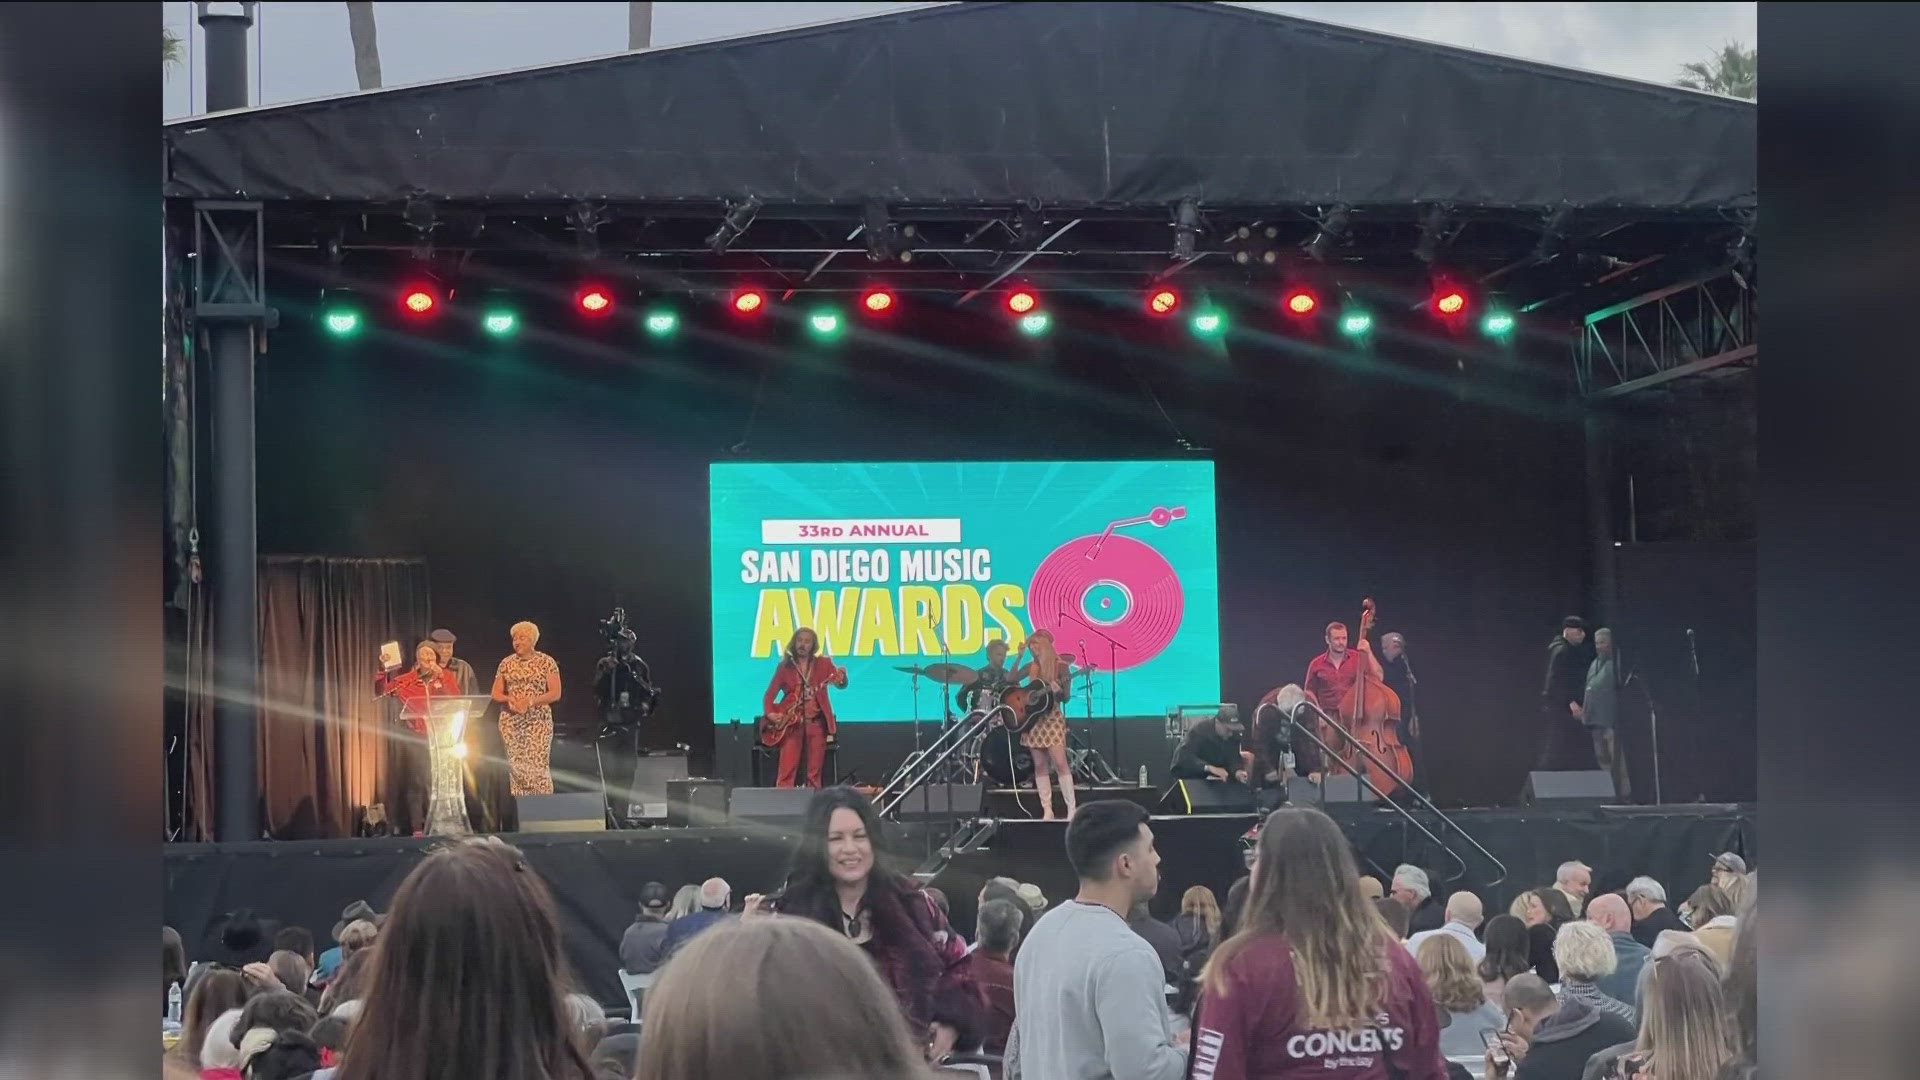 Organizers said nearly $54,000 was raised for the San Diego Music Foundation's Guitars for School program.